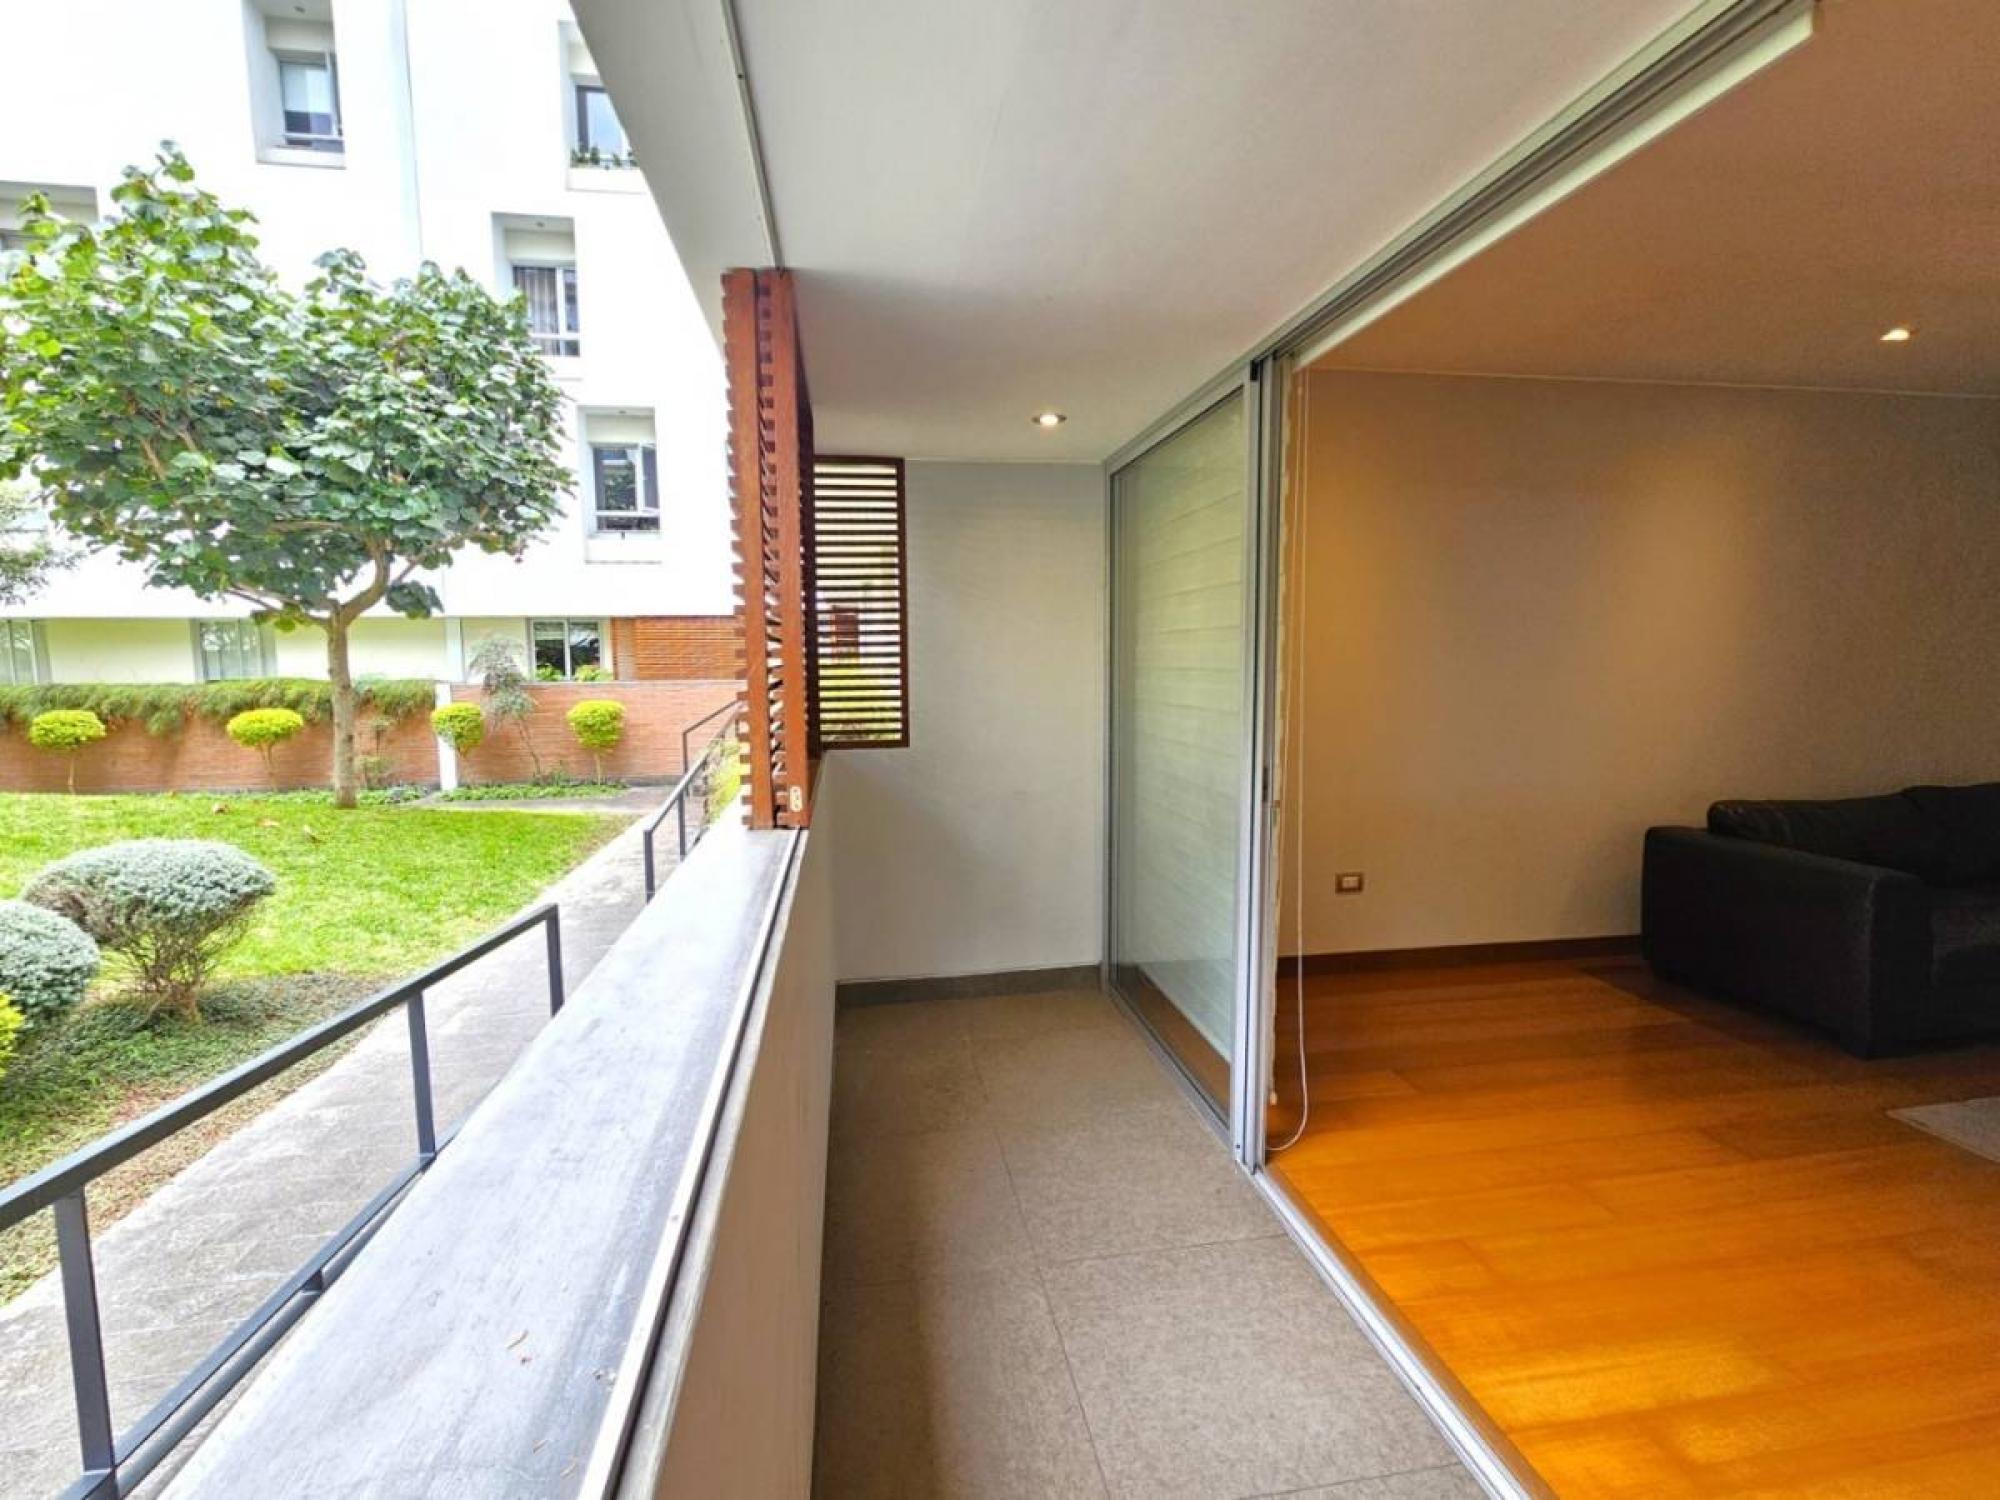 Picture of Apartment For Sale in Lima, Lima, Peru